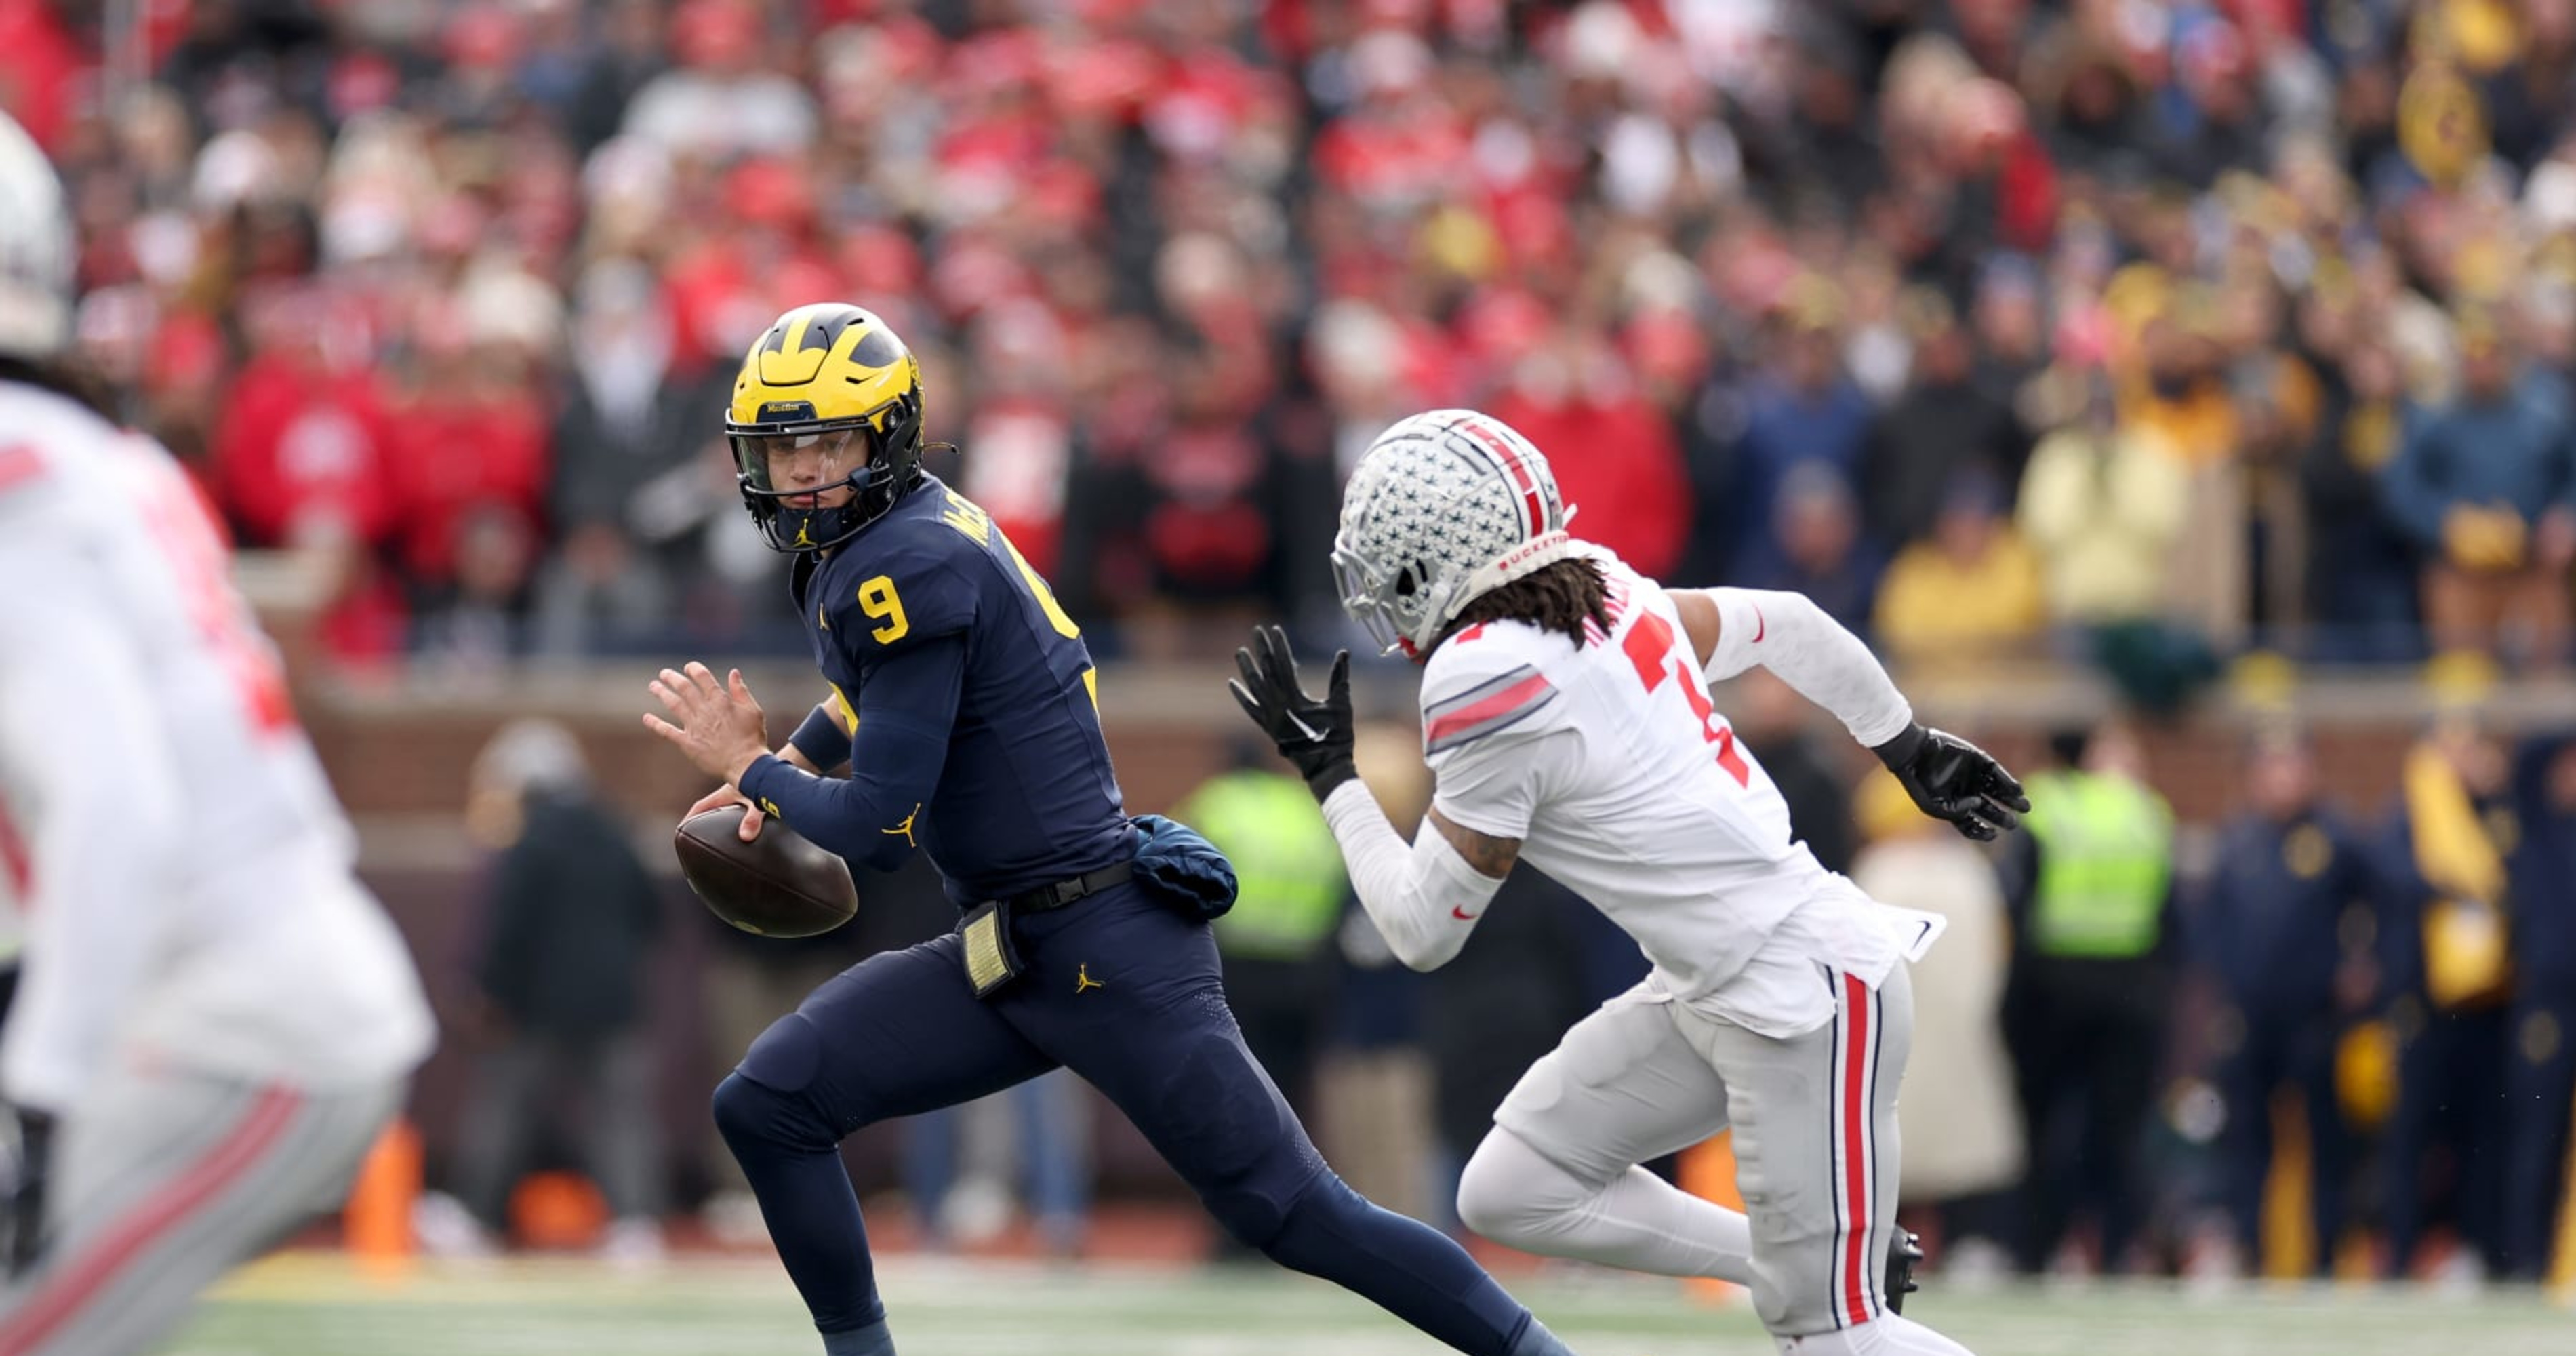 Ohio State AD: Michigan CFB Wins Should Have Asterisk After Sign-Stealing Scandal